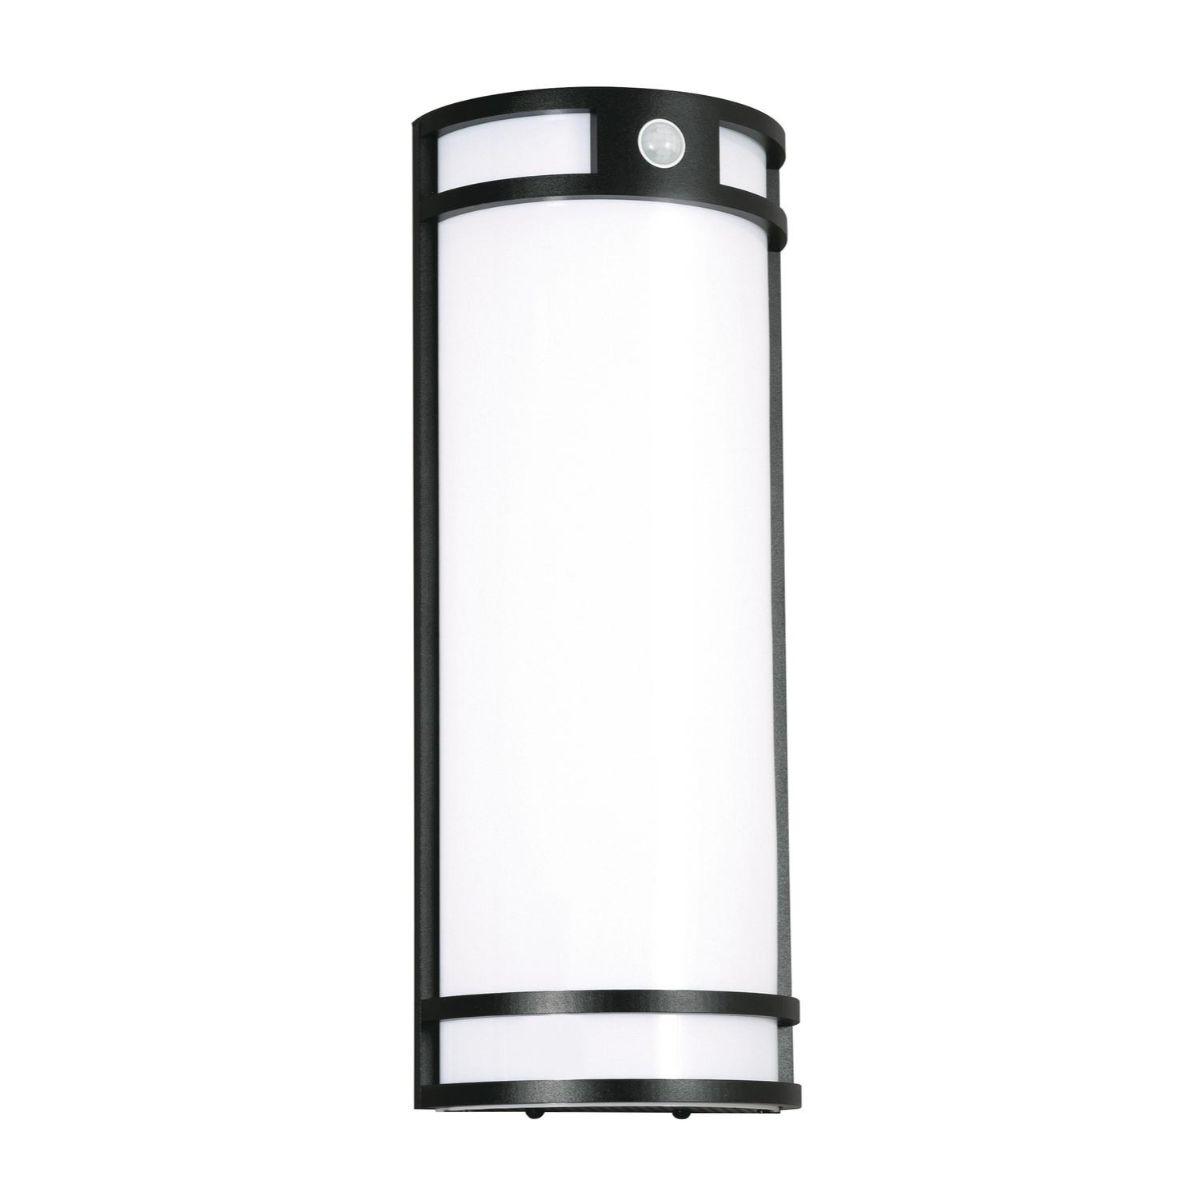 Elston 18 in. LED Outdoor Wall Sconce